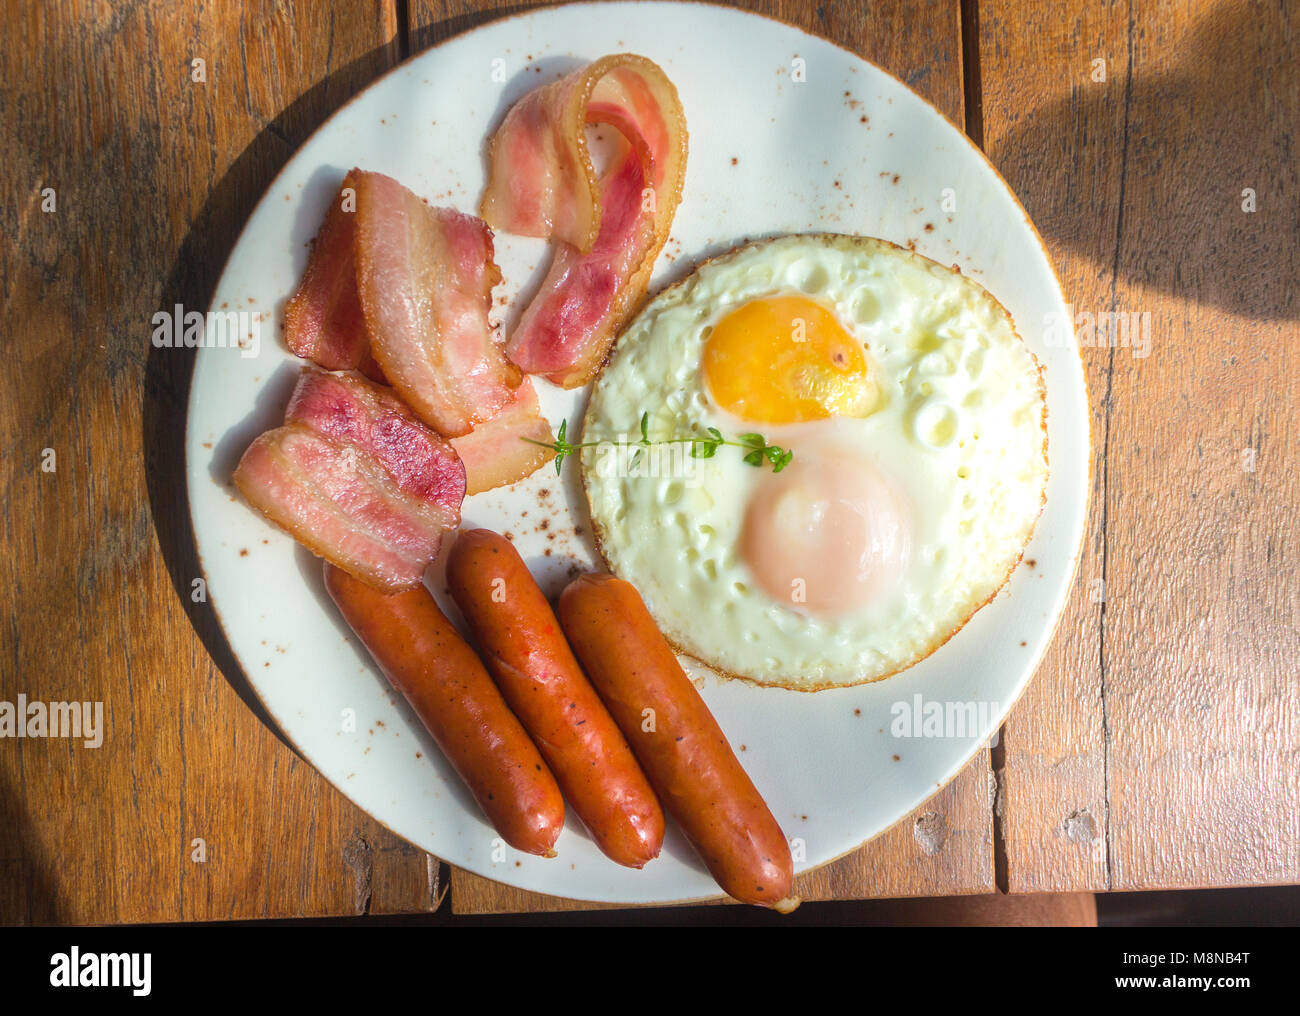 Set of american breakfast with bacon, fried eggs and sausage on wood table background Stock Photo